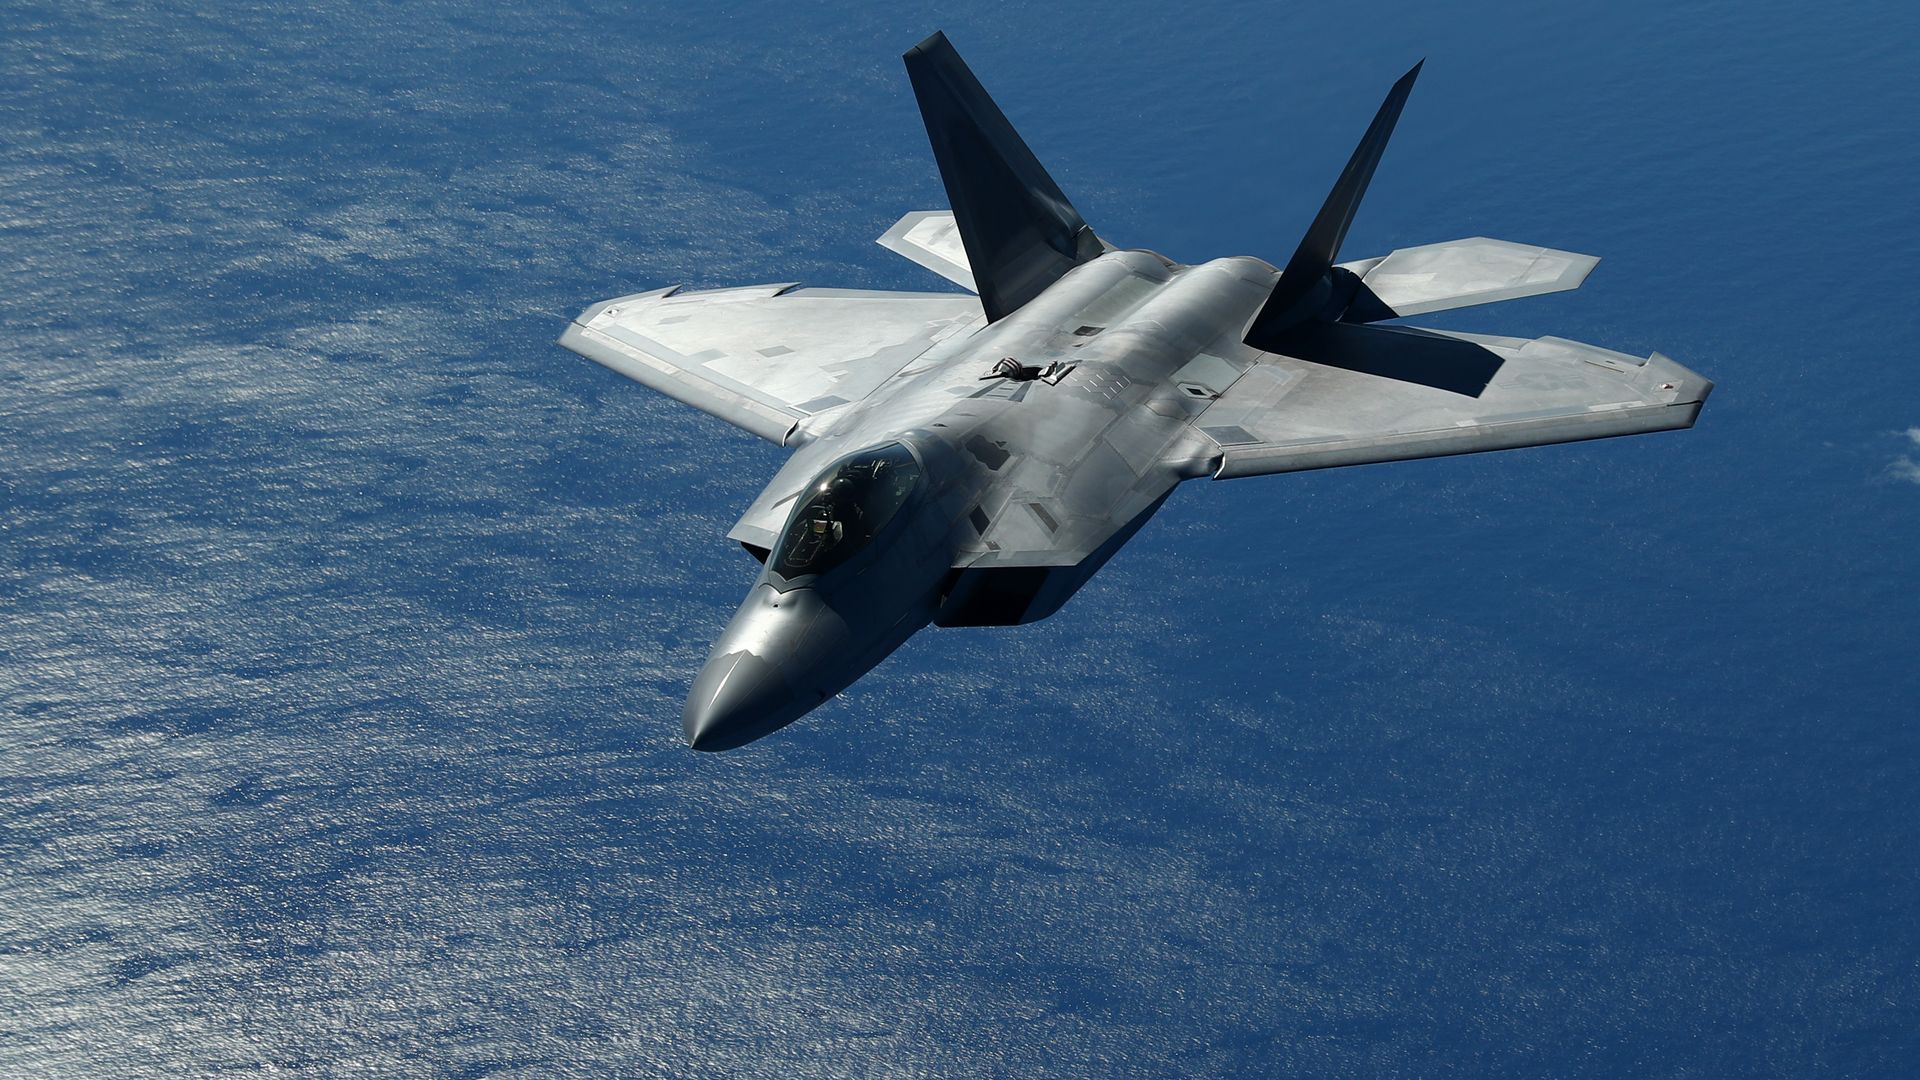 The F-22 Raptor after refuelling from the KC-10 Extender off the Queensland coast on July 17, 2019 in Brisbane, Australia.